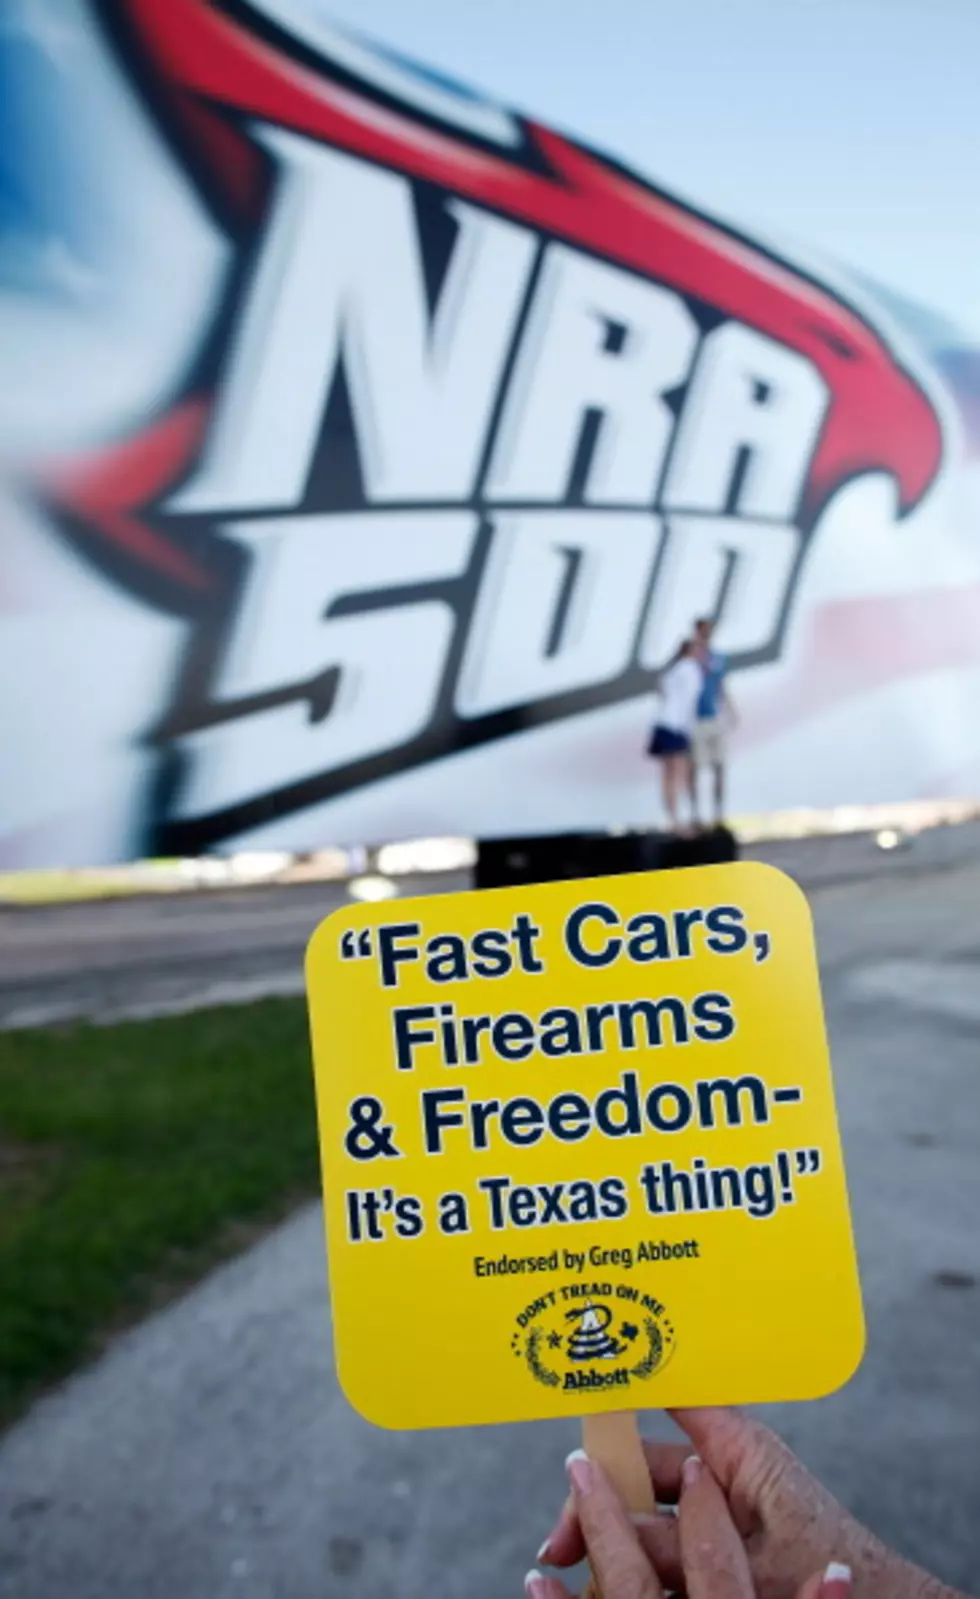 Man Uses Gun To Commit Suicide at NRA Sponsored NASCAR Race in Texas